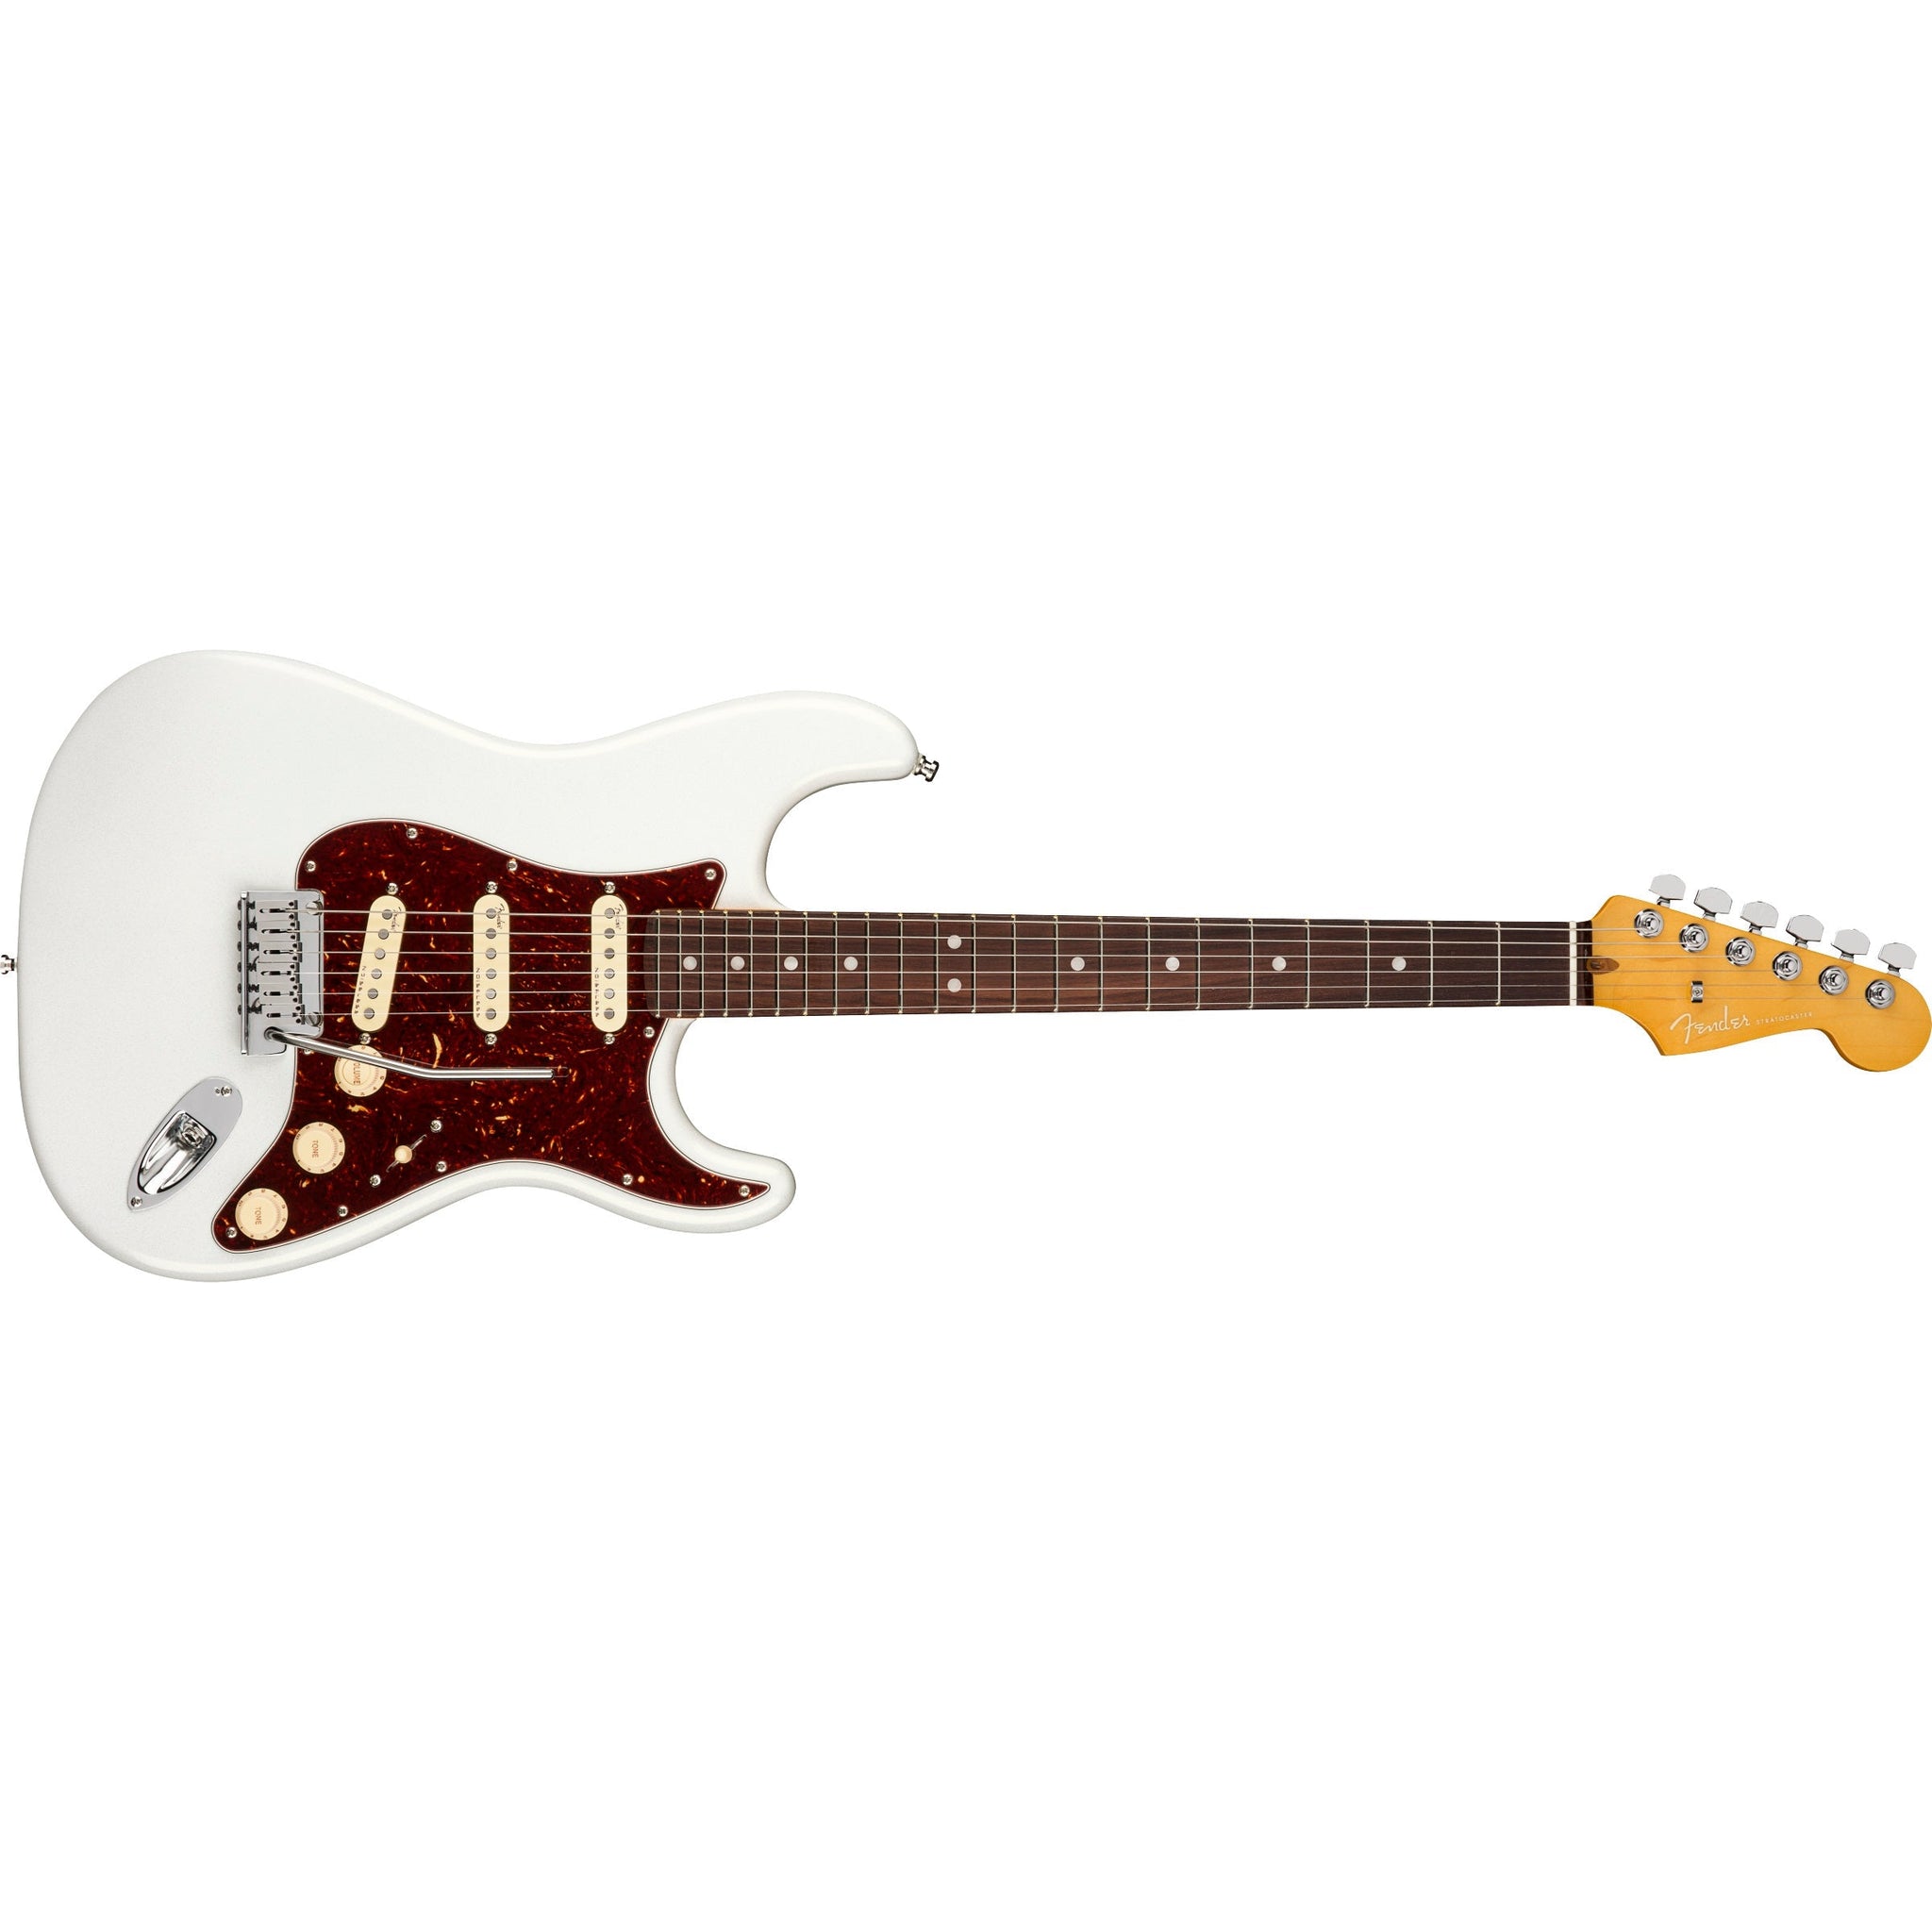 Fender American Ultra Stratocaster Electric Guitar with Hardshell Case-Arctic Pearl-Music World Academy